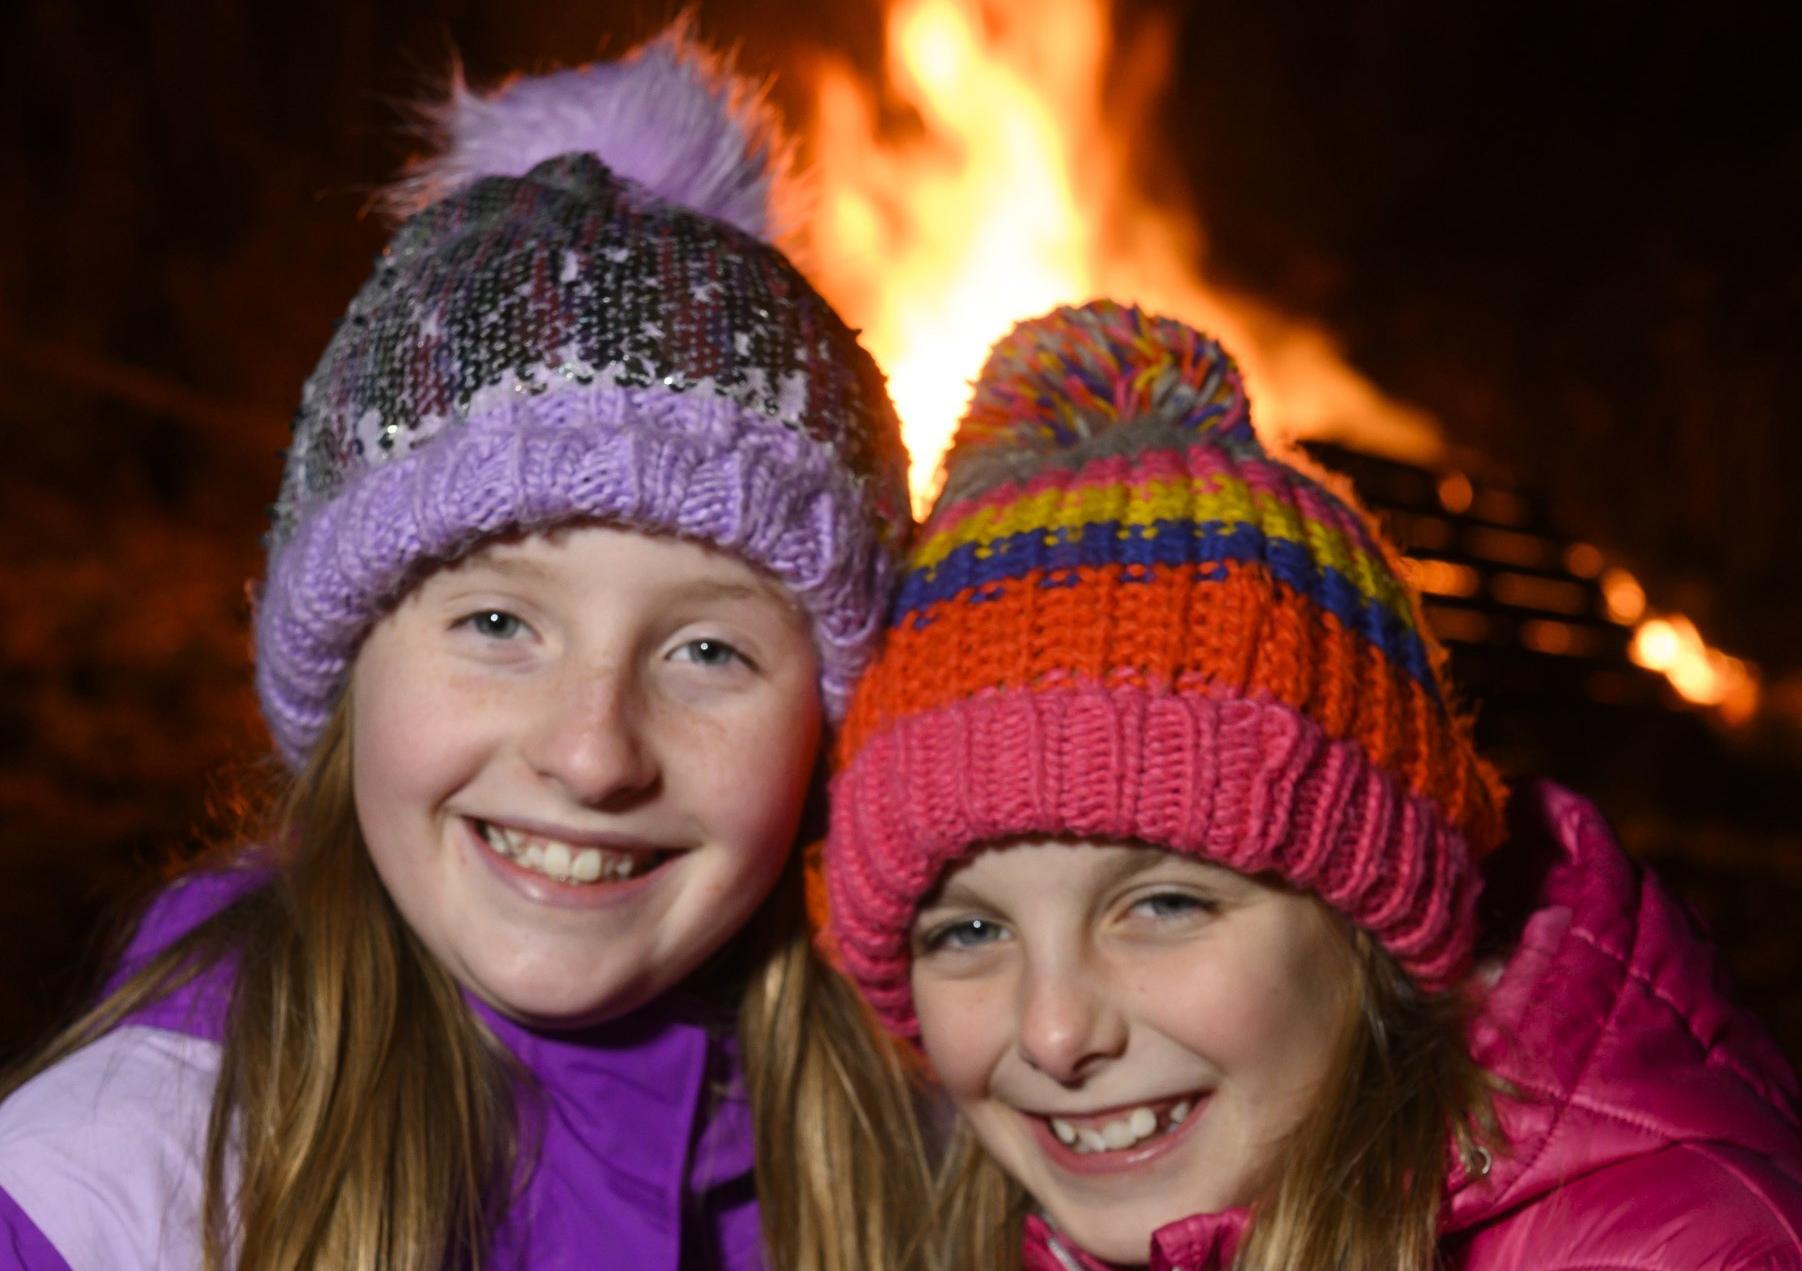 Lauder fireworks display 2019

Rhiannon Dickey with Mia D'Andrea

Pic Phil Wilkinson 
info@philspix.com